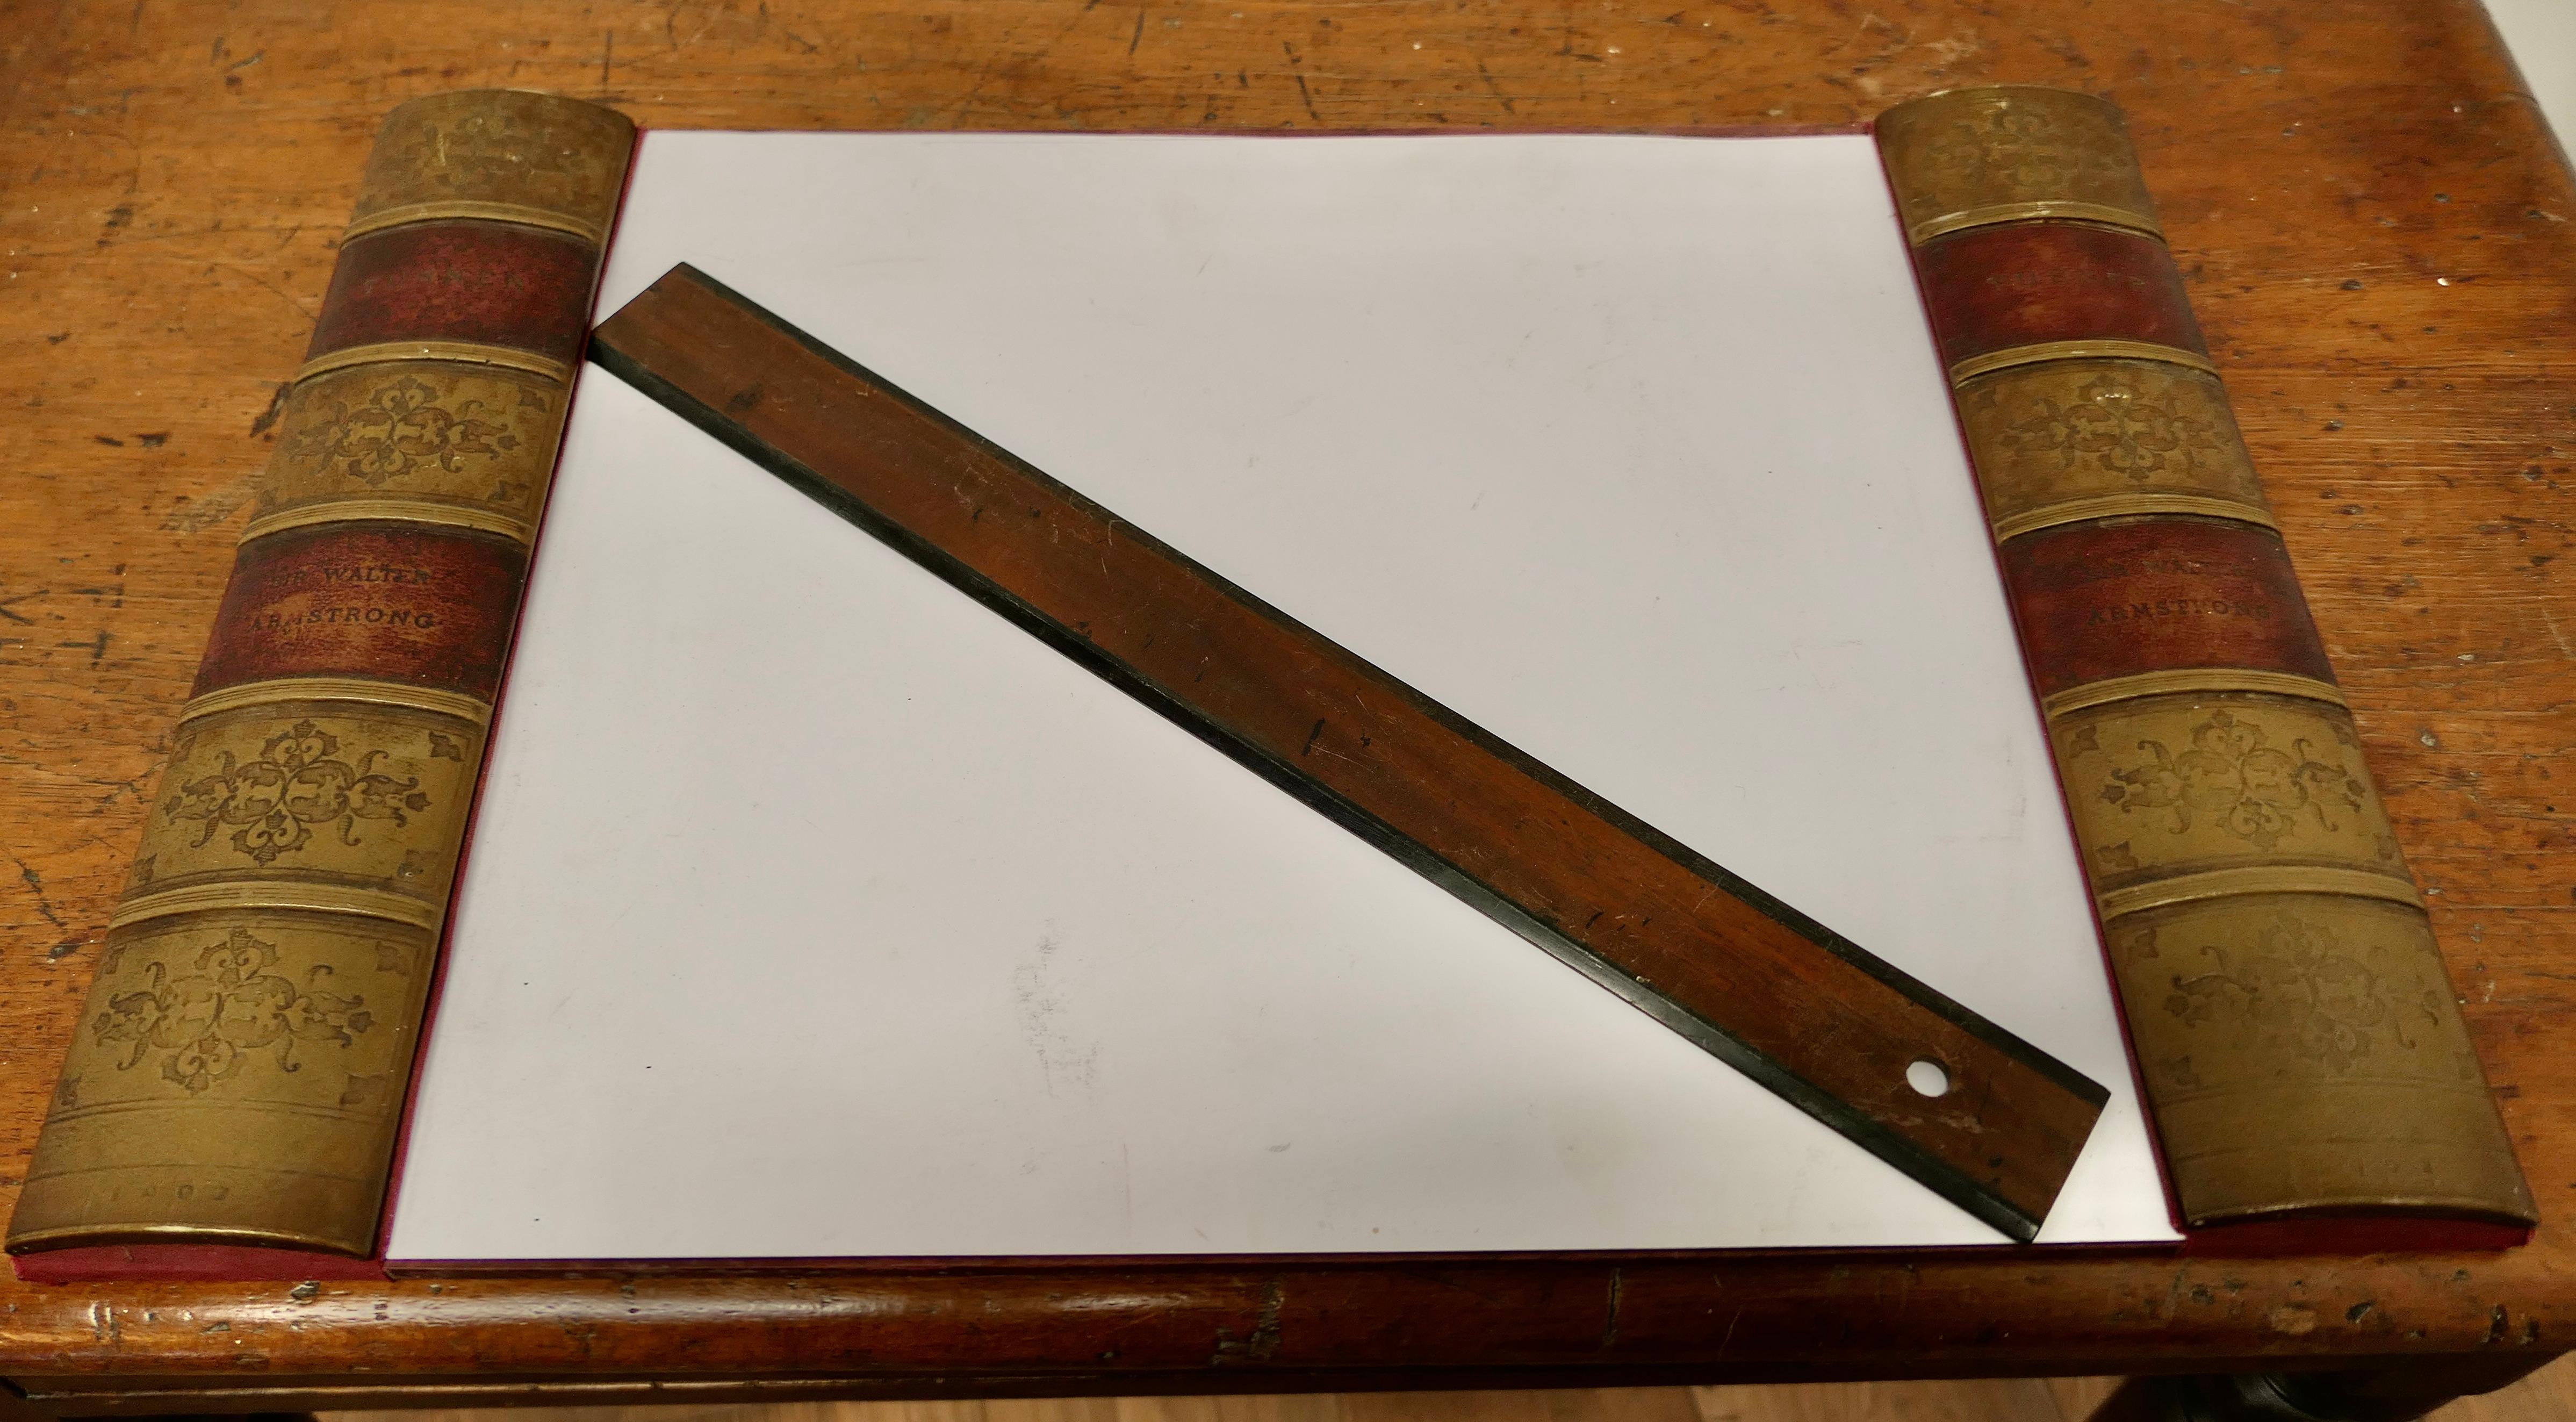 A Large Desk Blotter 

A great piece of desk furniture, the blotter has simulated book spines in gilt and burgundy leather, and it also comes with a Matching Stanley ruler
The Blotter is 15”x 22”
MS265